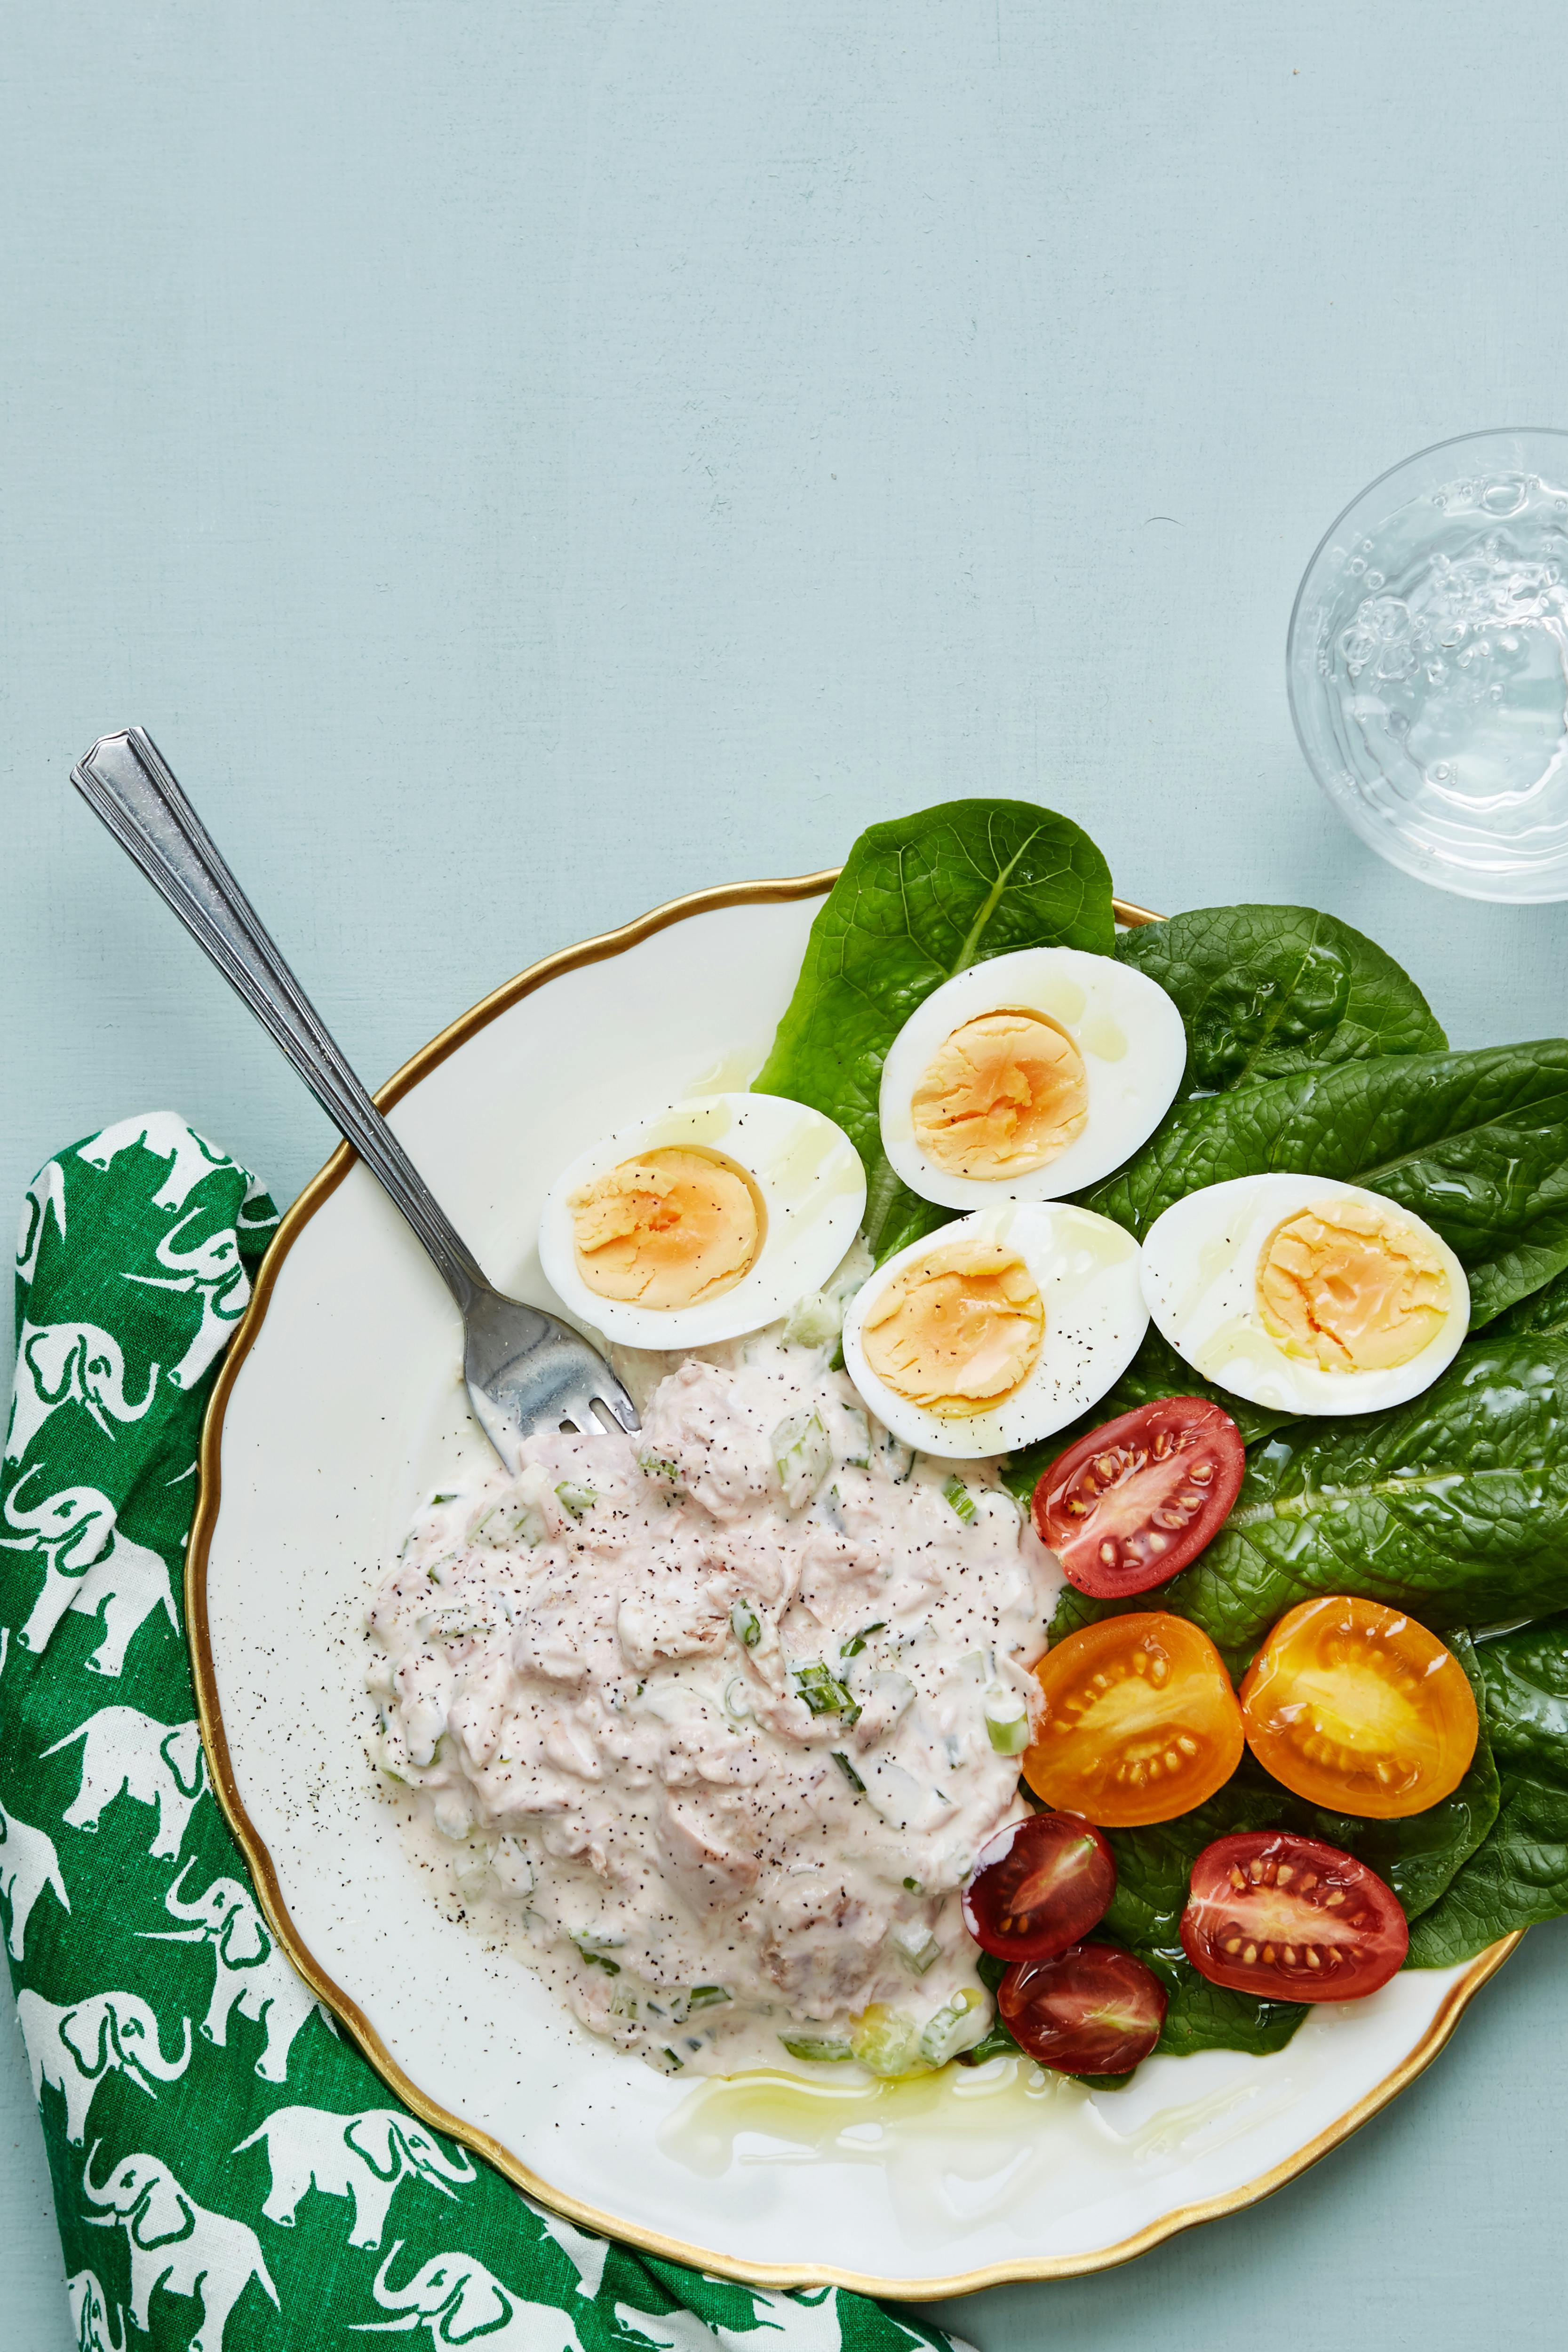 is canned tuna good for keto diet